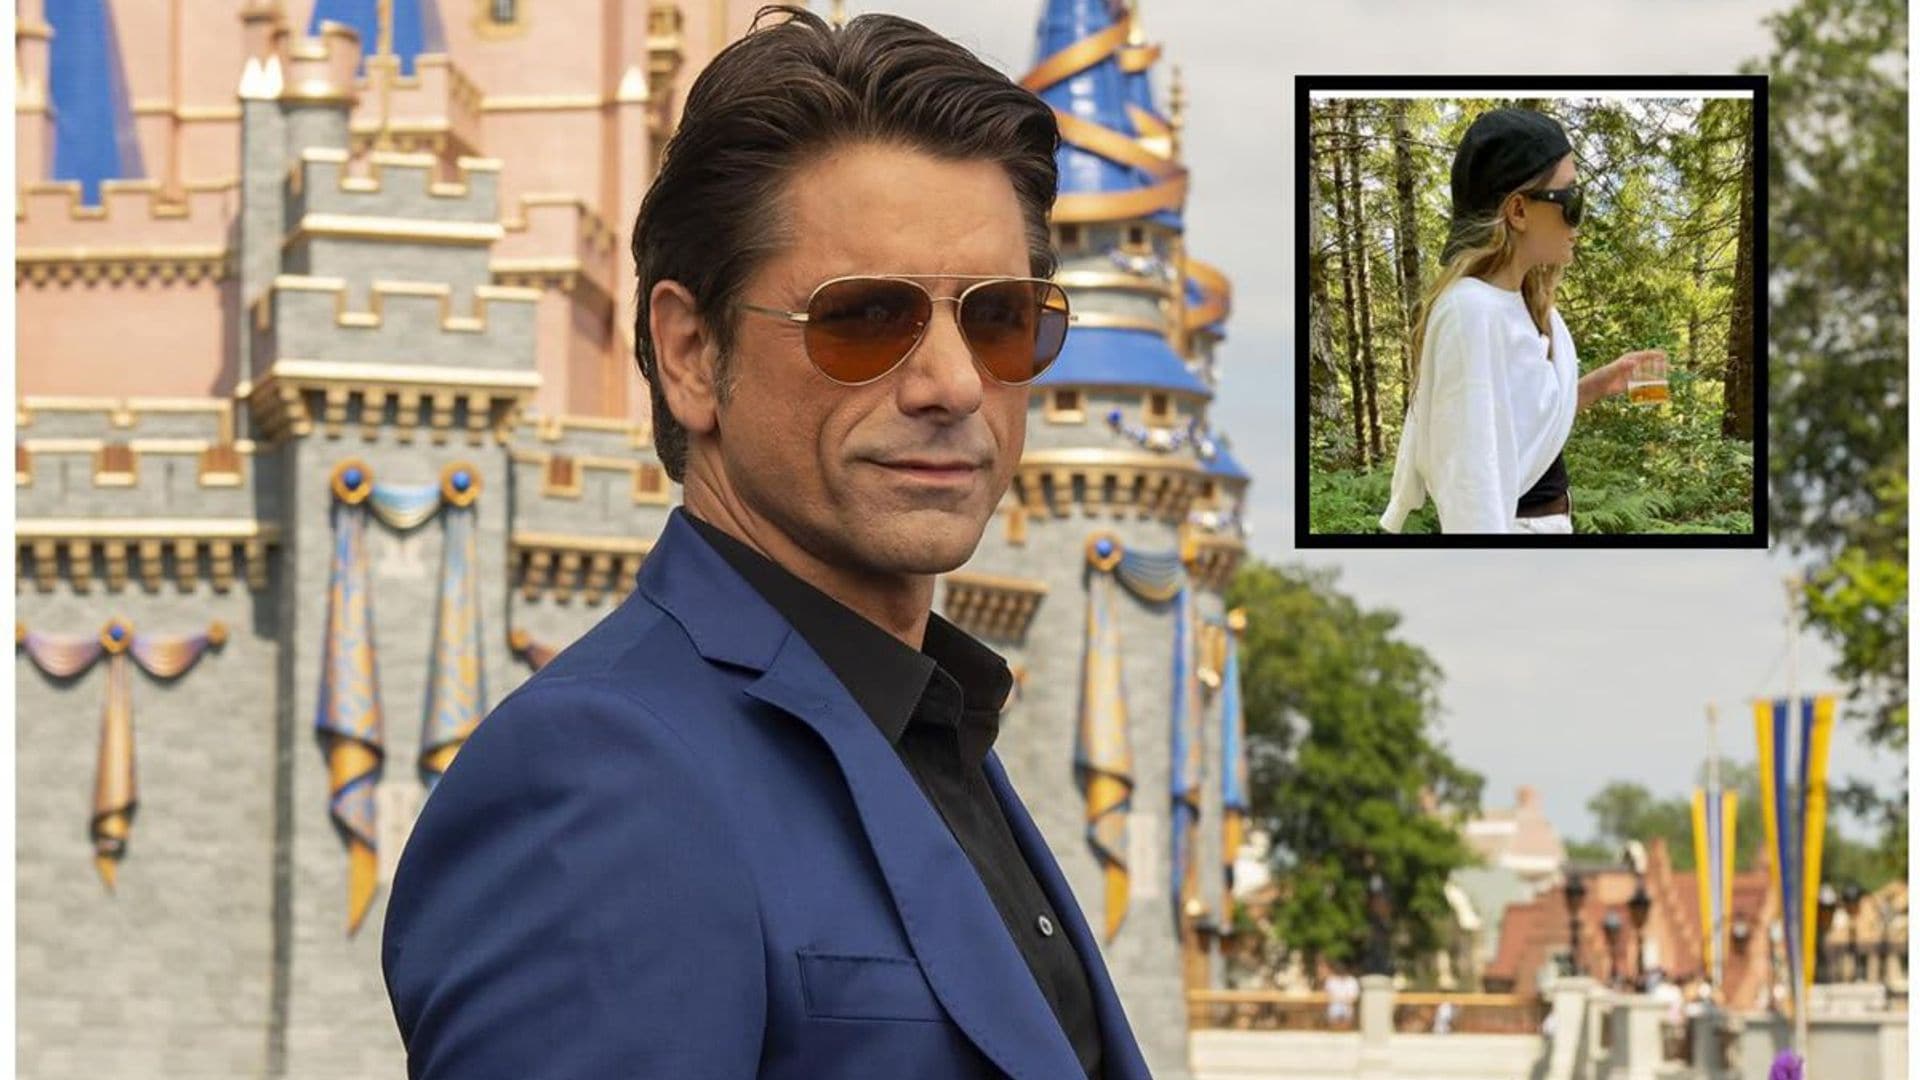 John Stamos reacts to viral photo of Ashley Olsen hiking with a machete and drink